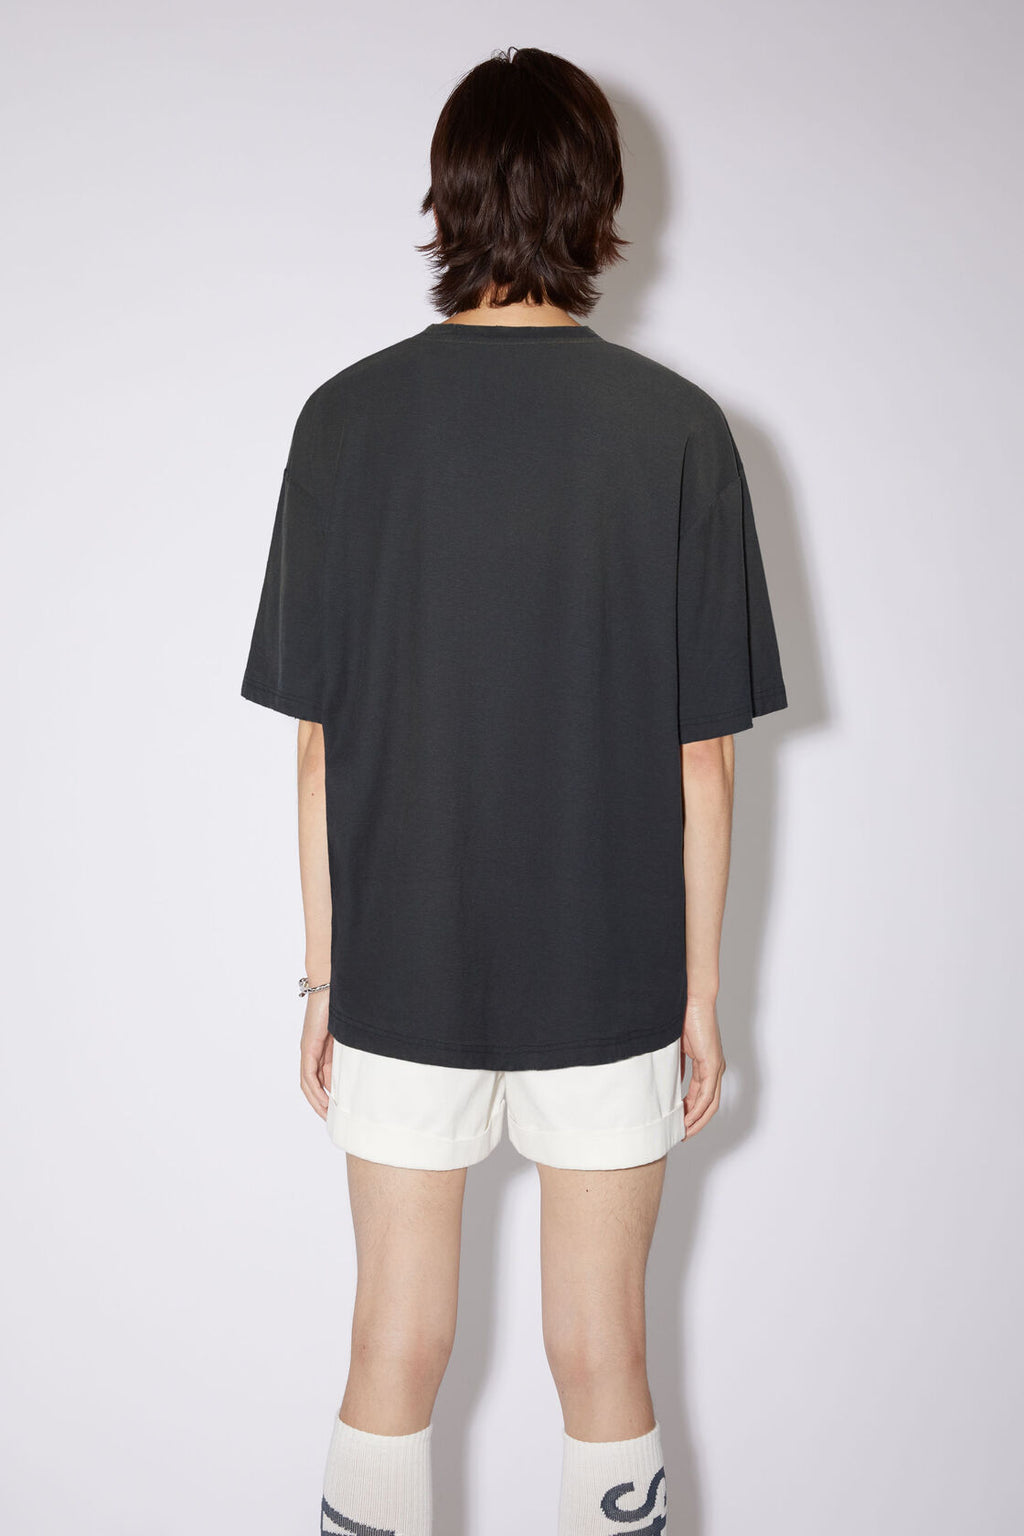 ACNE STUDIO Unisex Logo T-shirt Relaxed Fit